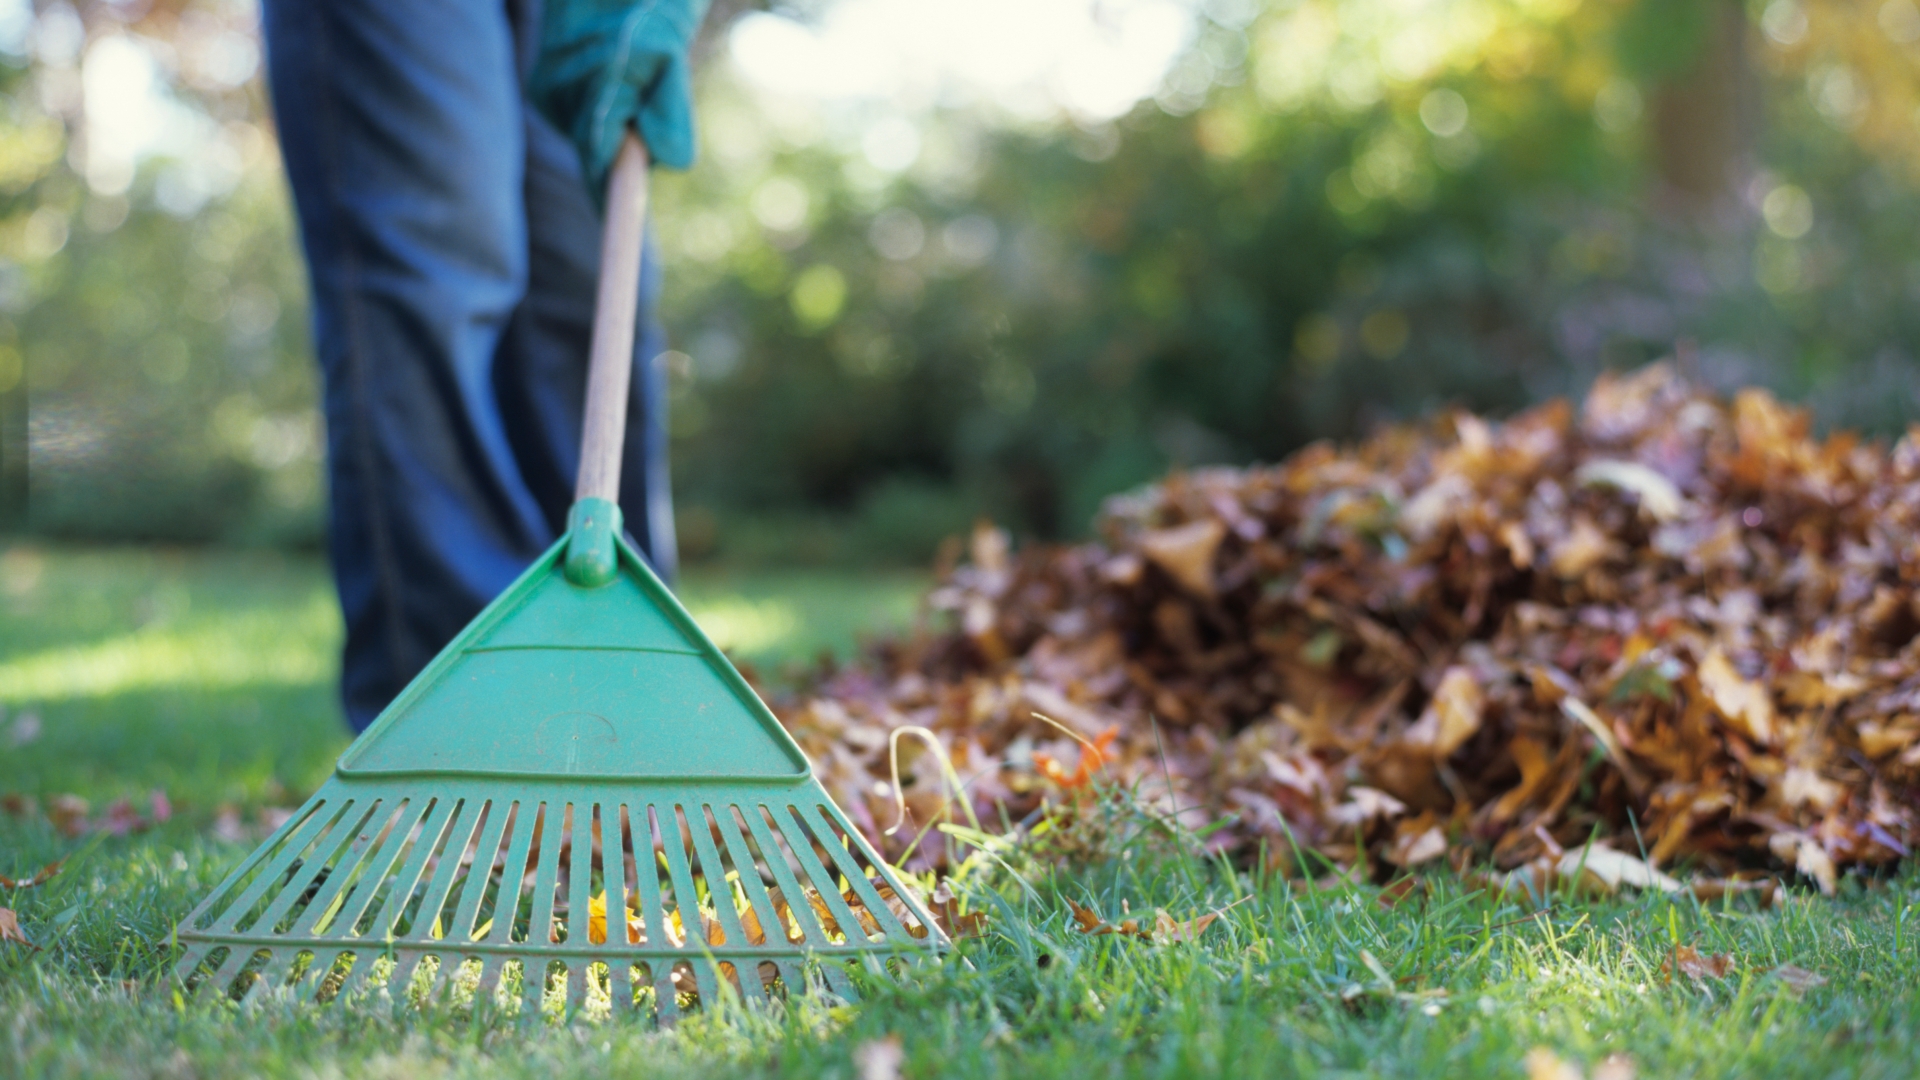 I am a gardening expert. Here are 8 ways to use dead leaves in your yard without filling up your green waste bin